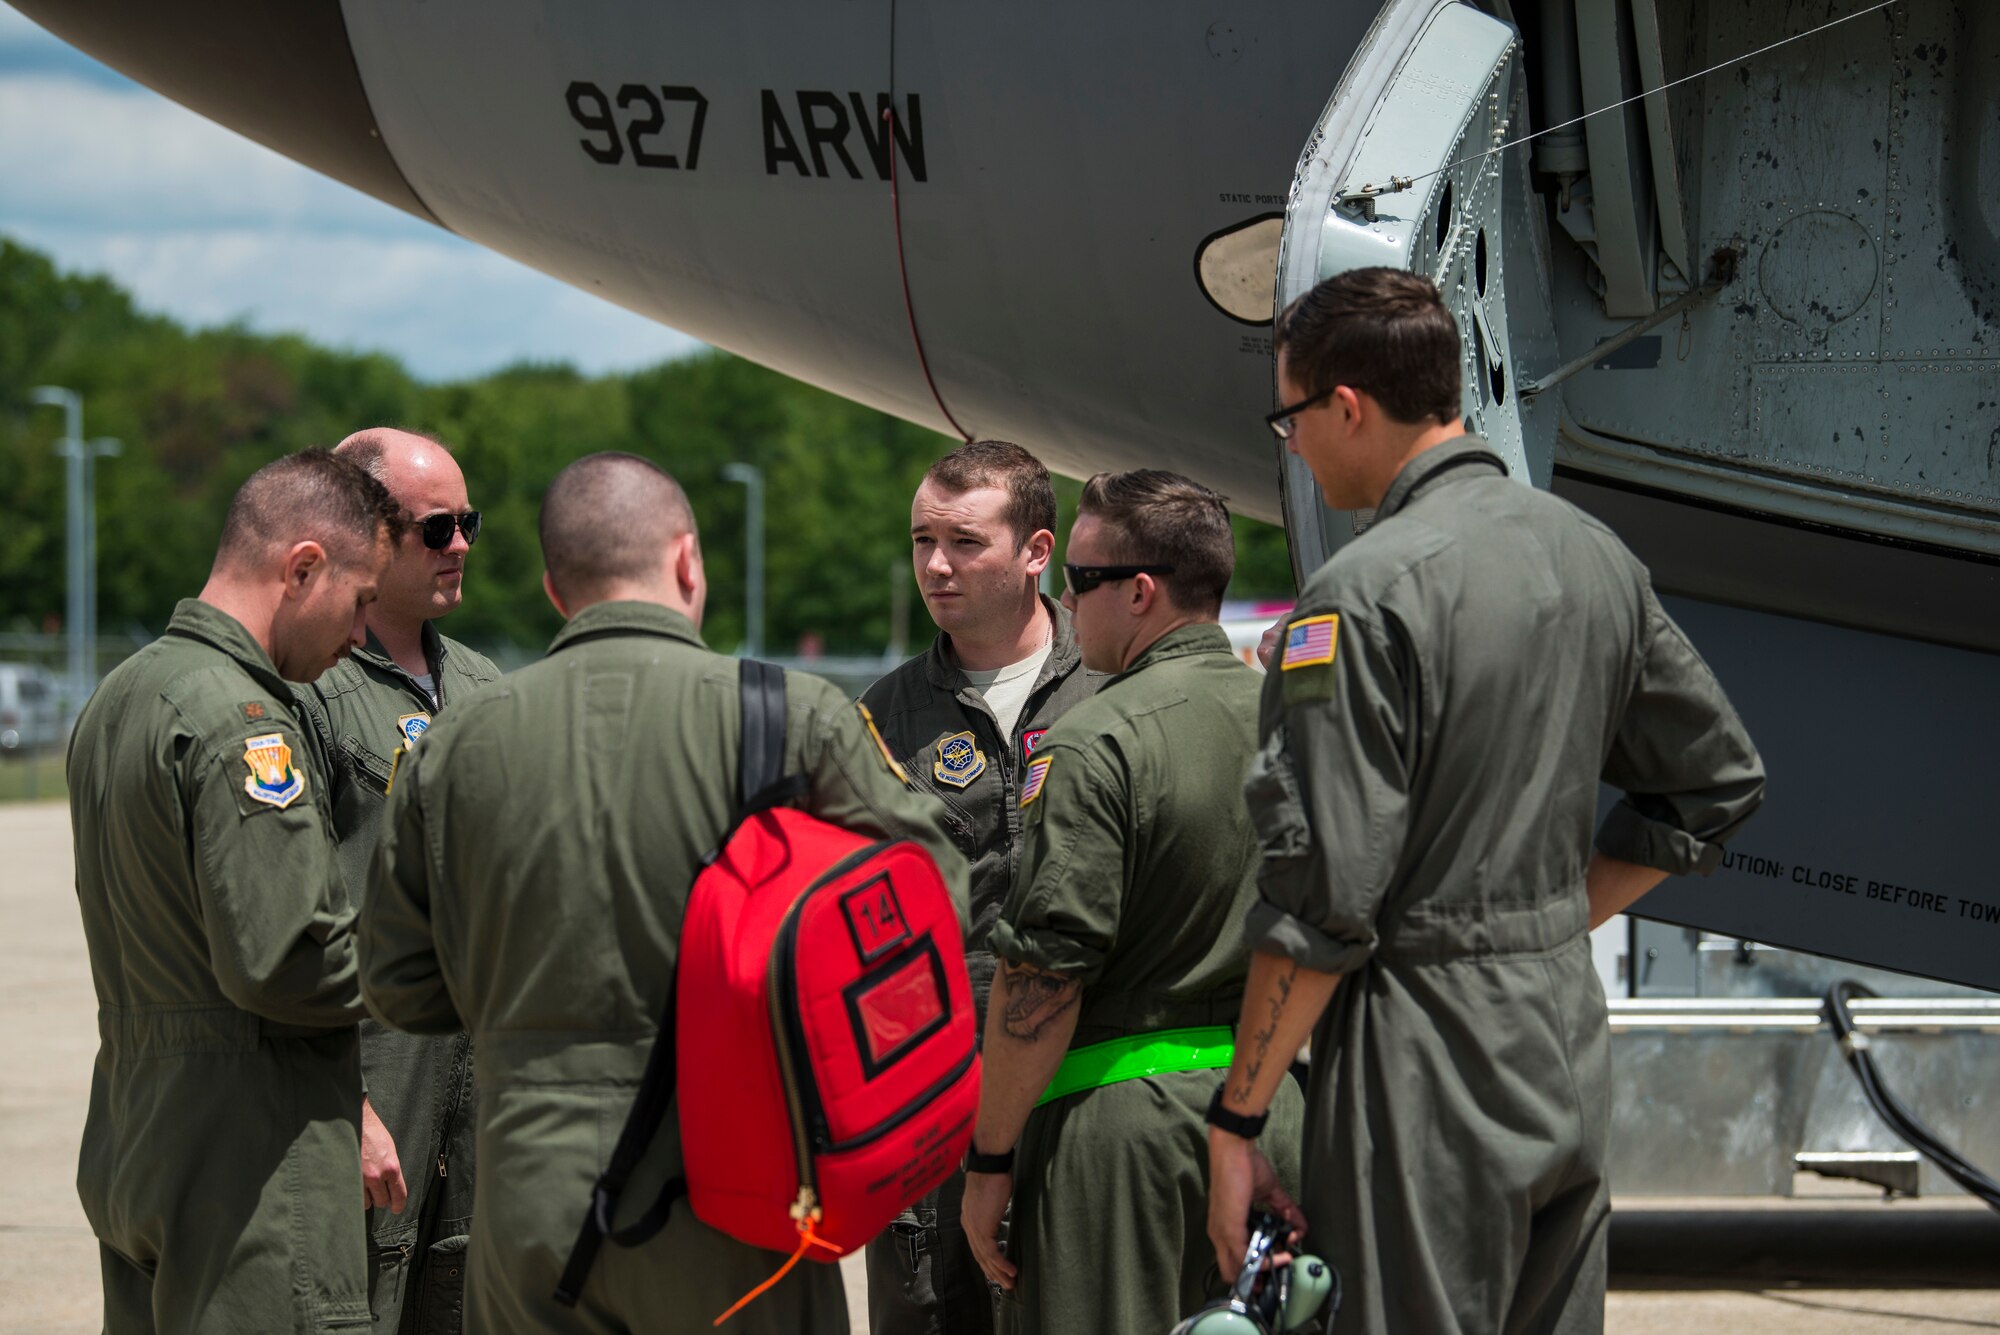 U.S. Air Force Airmen assigned to the 6th Air Mobility Wing, MacDill Air Force Base, Fla., conduct a pre-flight briefing prior to a refueling mission in support of Exercise Swift Response 18, June 8, 2018 at Pease Air National Guard Base, N.H.